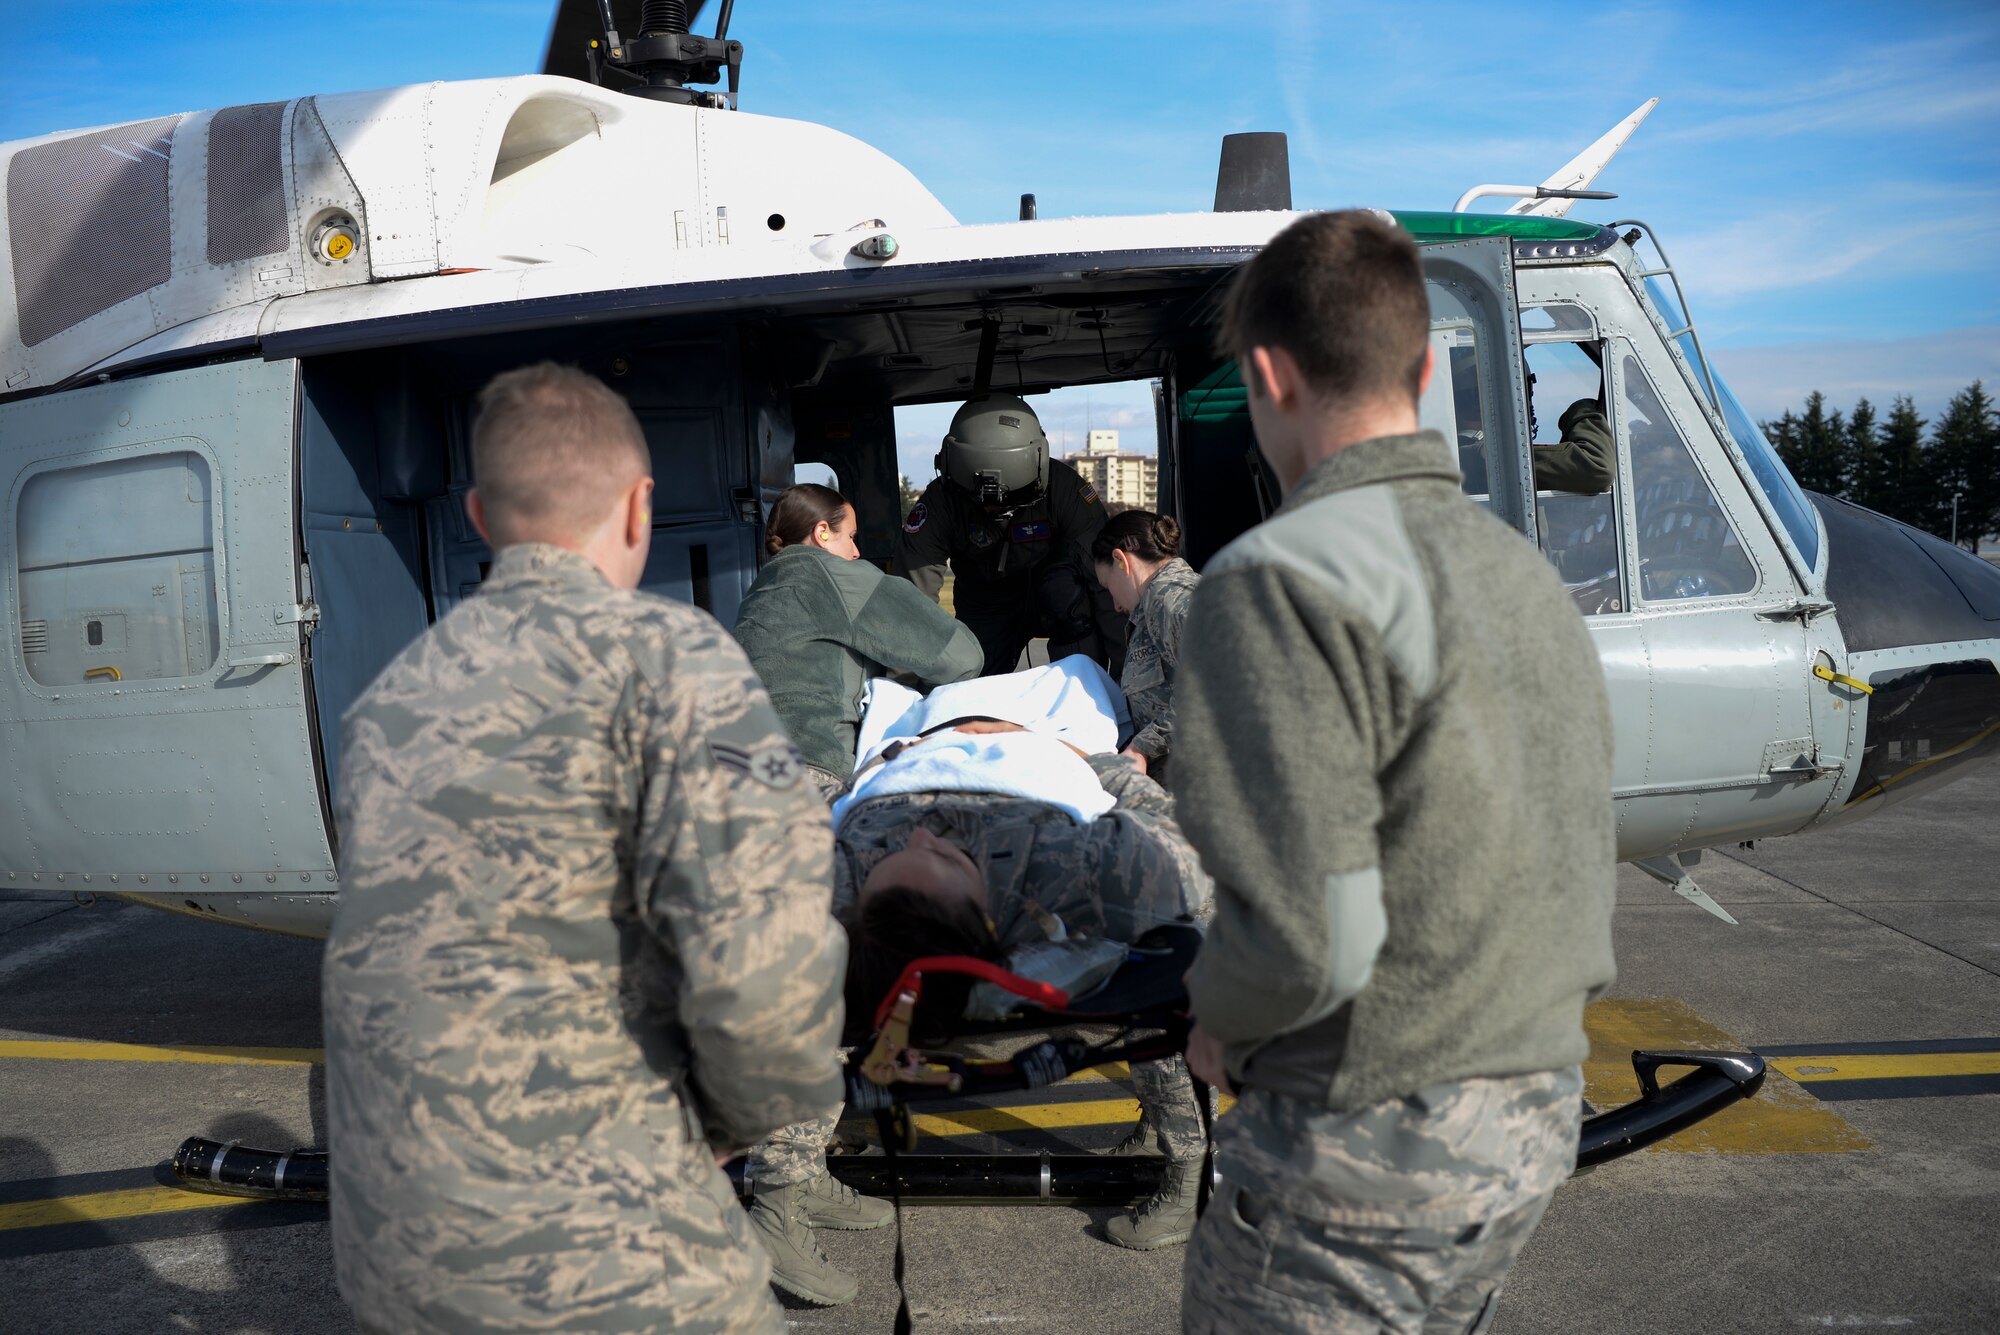 Members of the 374th Medical Group and the 459th Airlift Squadron load a patient into a UH-1N Iroquois during training, Nov. 16, 2018, at Yokota Air Base, Japan.